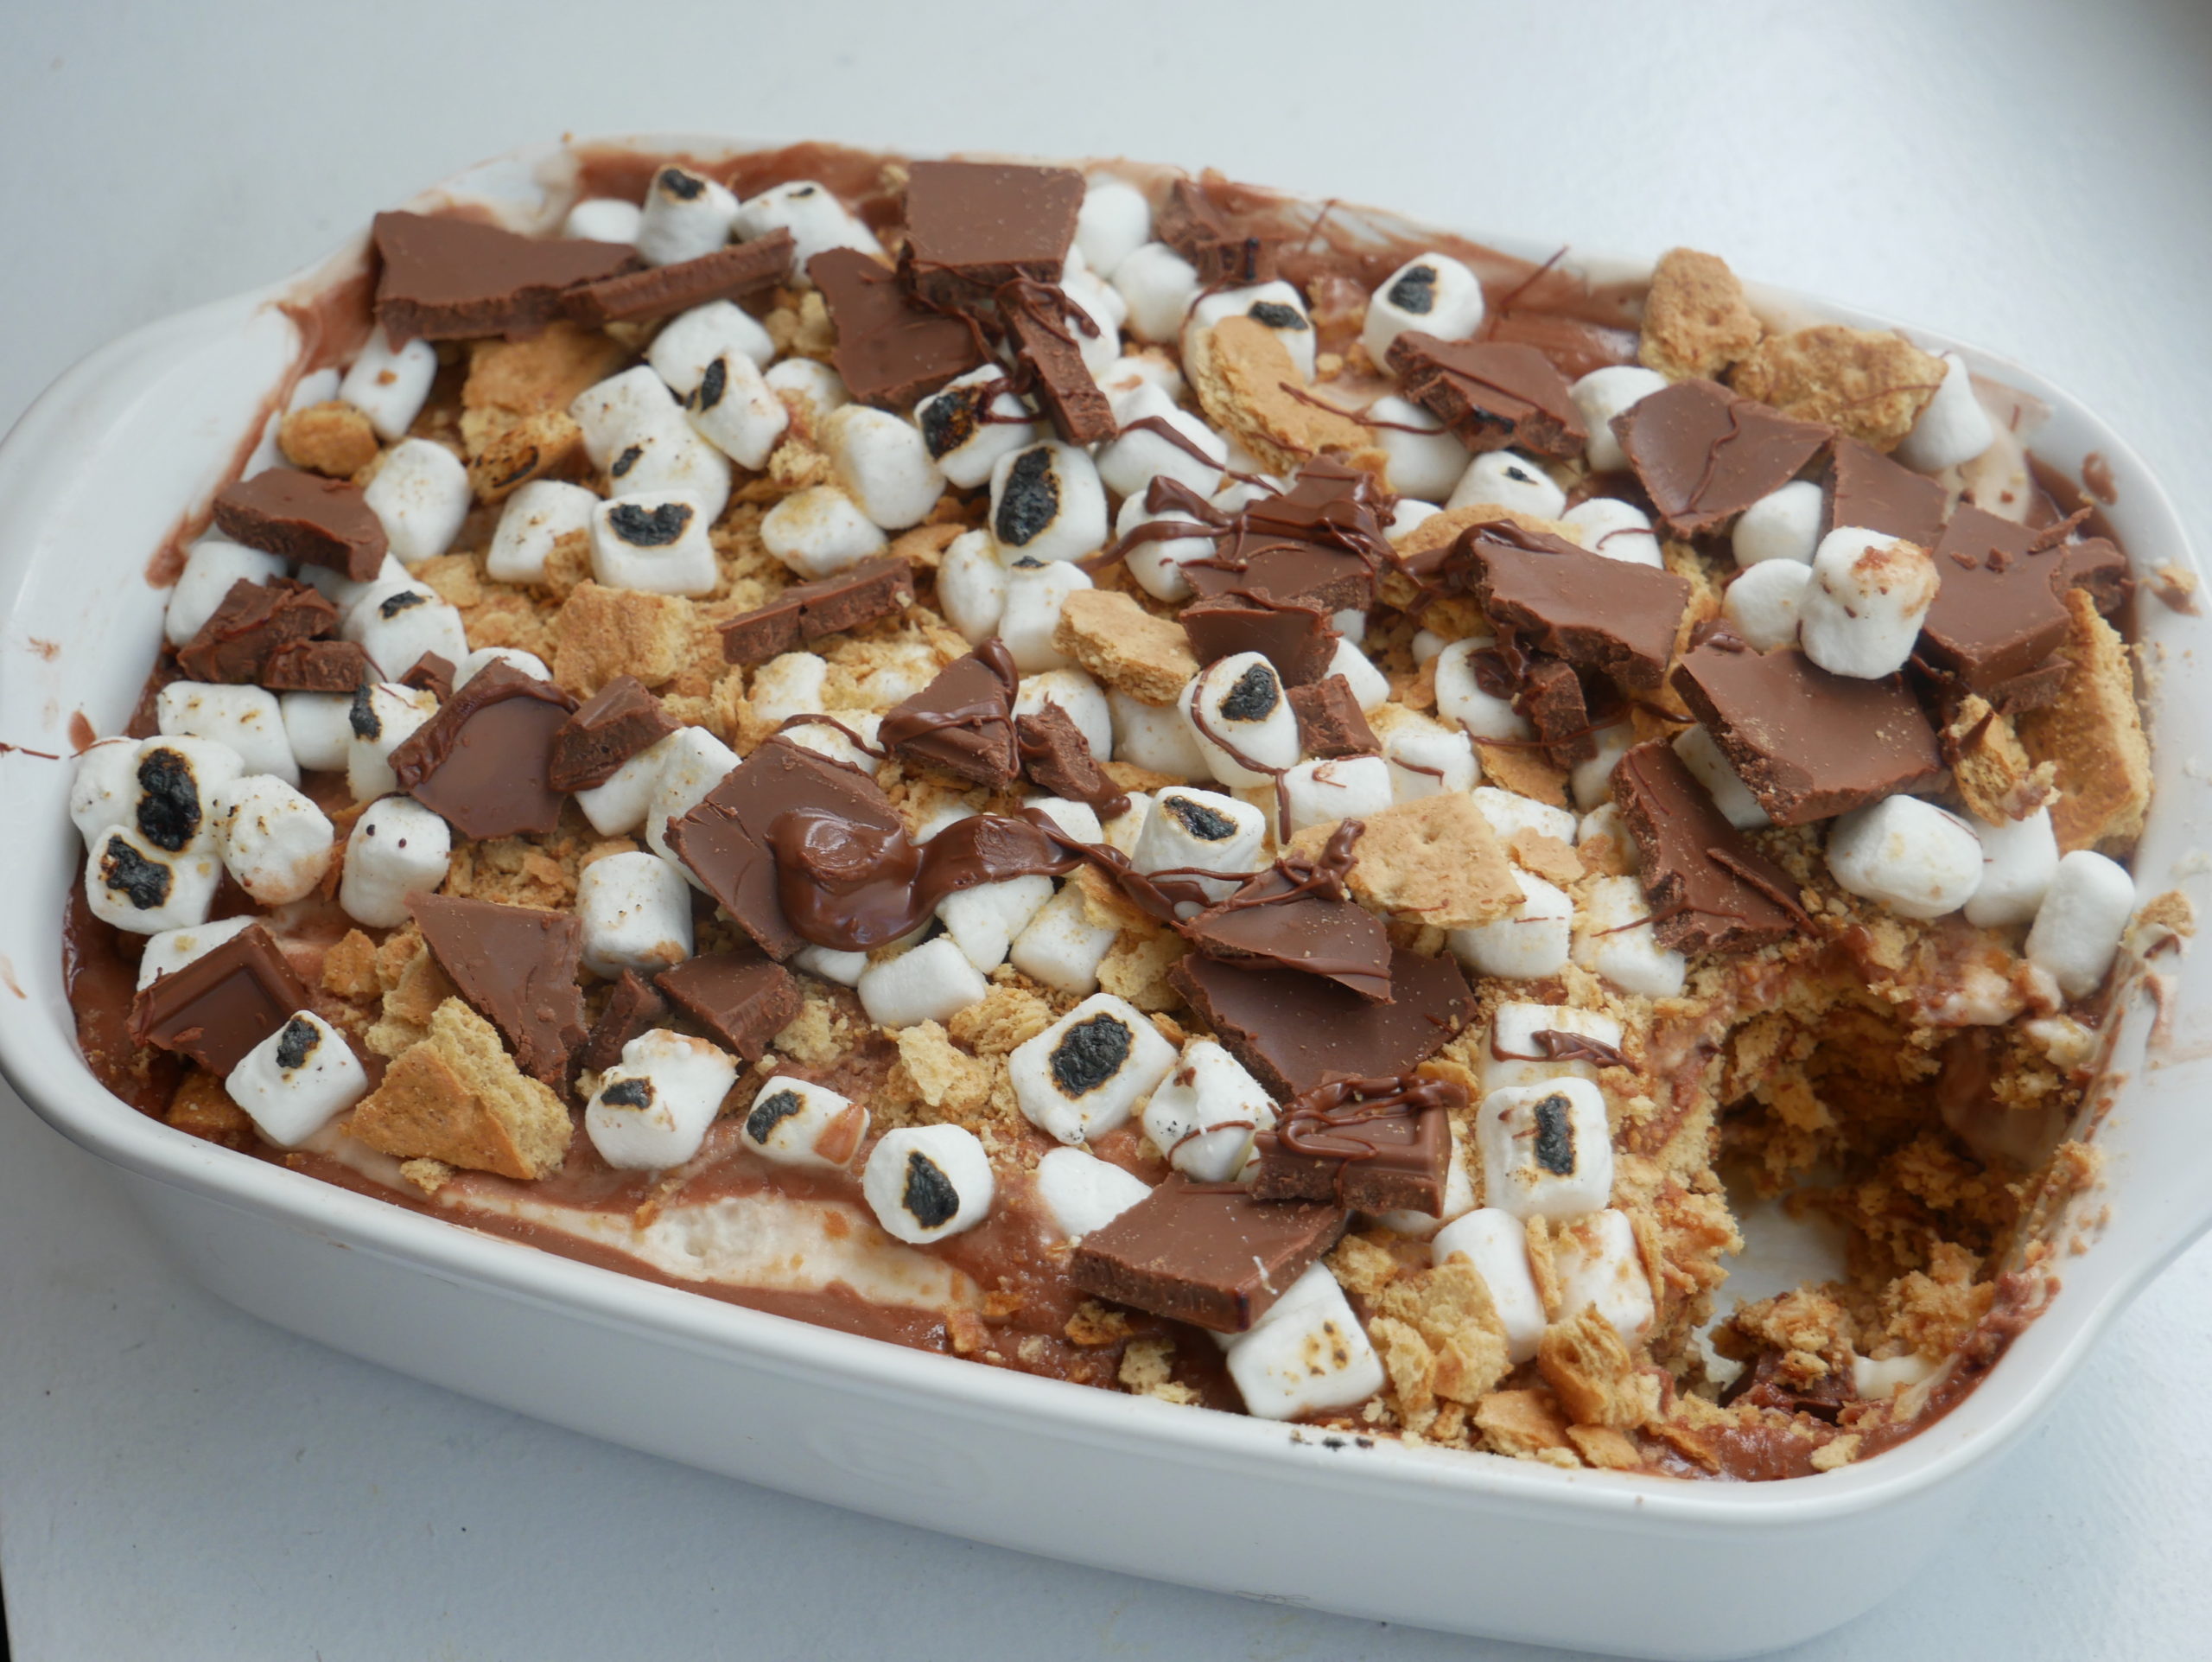 smores icebox cake with toasted marshmallows and nutella drizzle